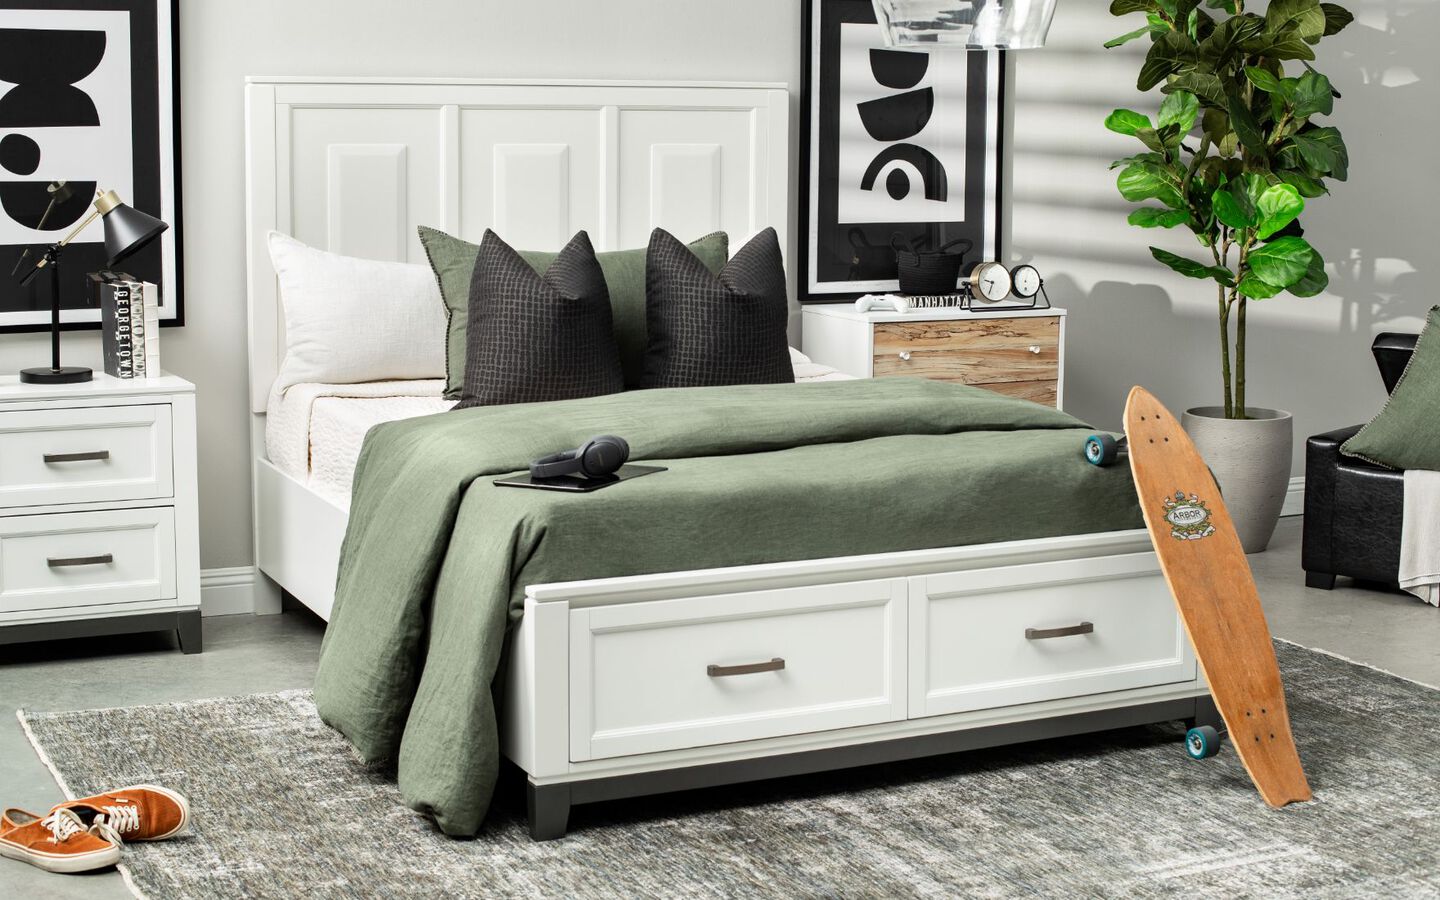 Bedroom with white bedframe with green comforter, black pillows, and matching white nightstand